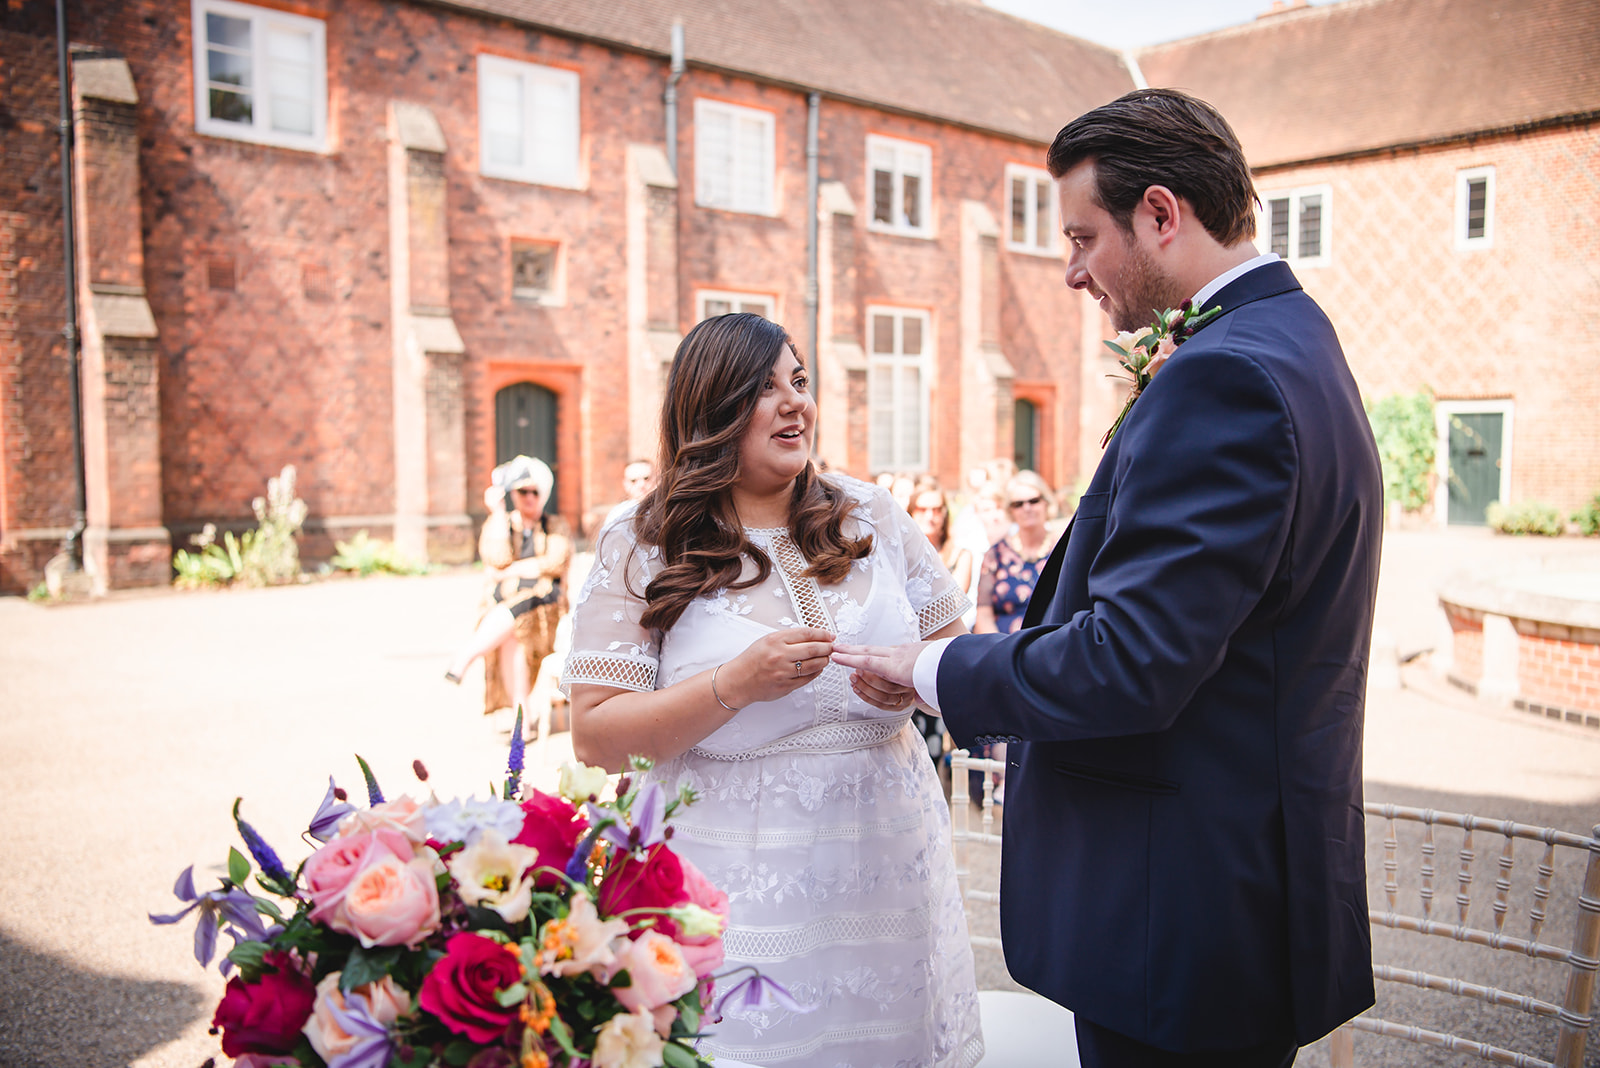 Nikita and Chris's  ring exchange during the wedding ceremony at the Fulham Palace